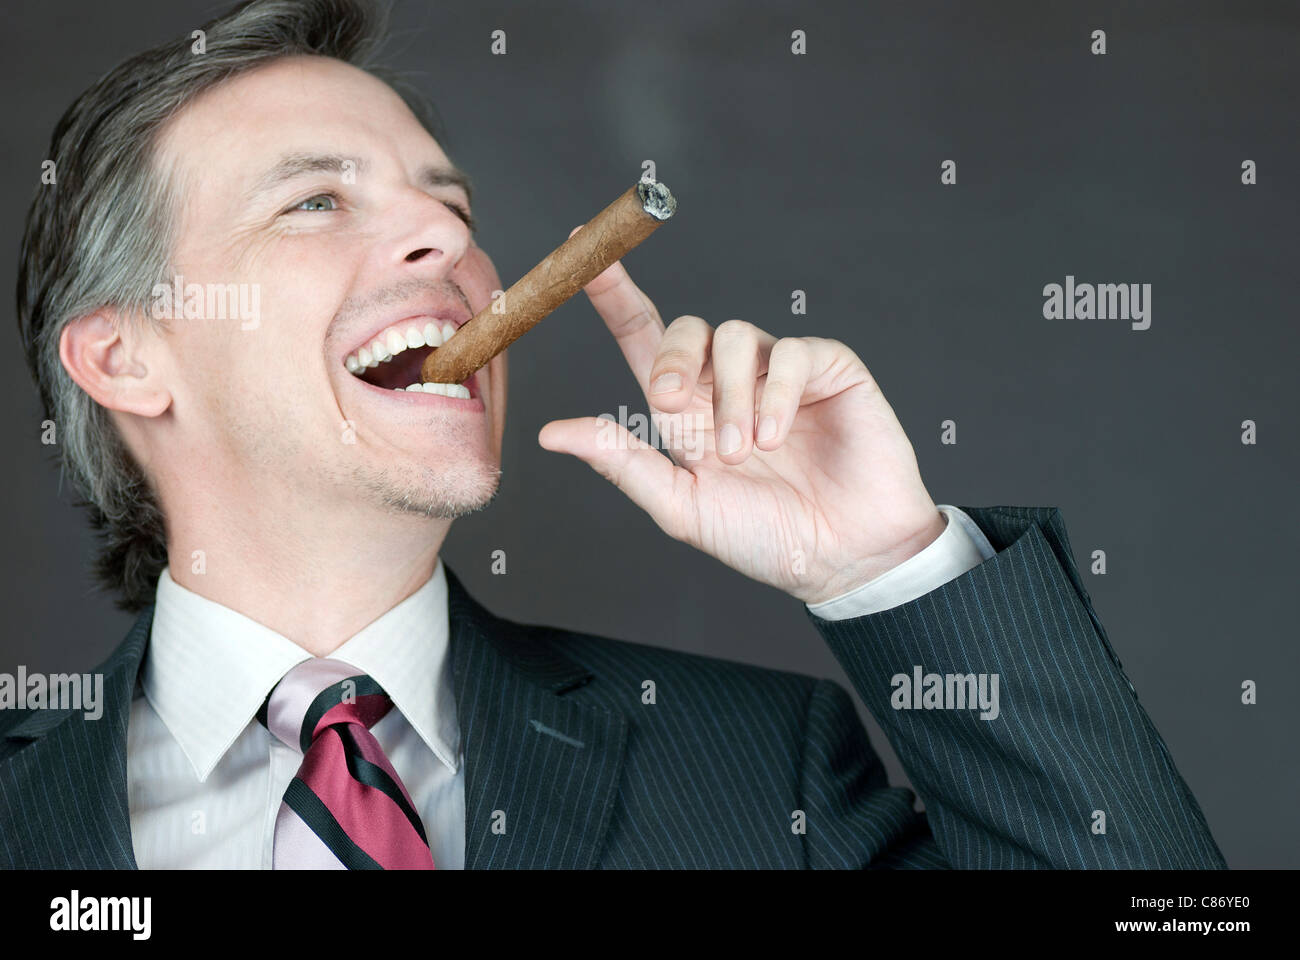 Close-up of a businessman celebrating with a cigar, side view. Stock Photo